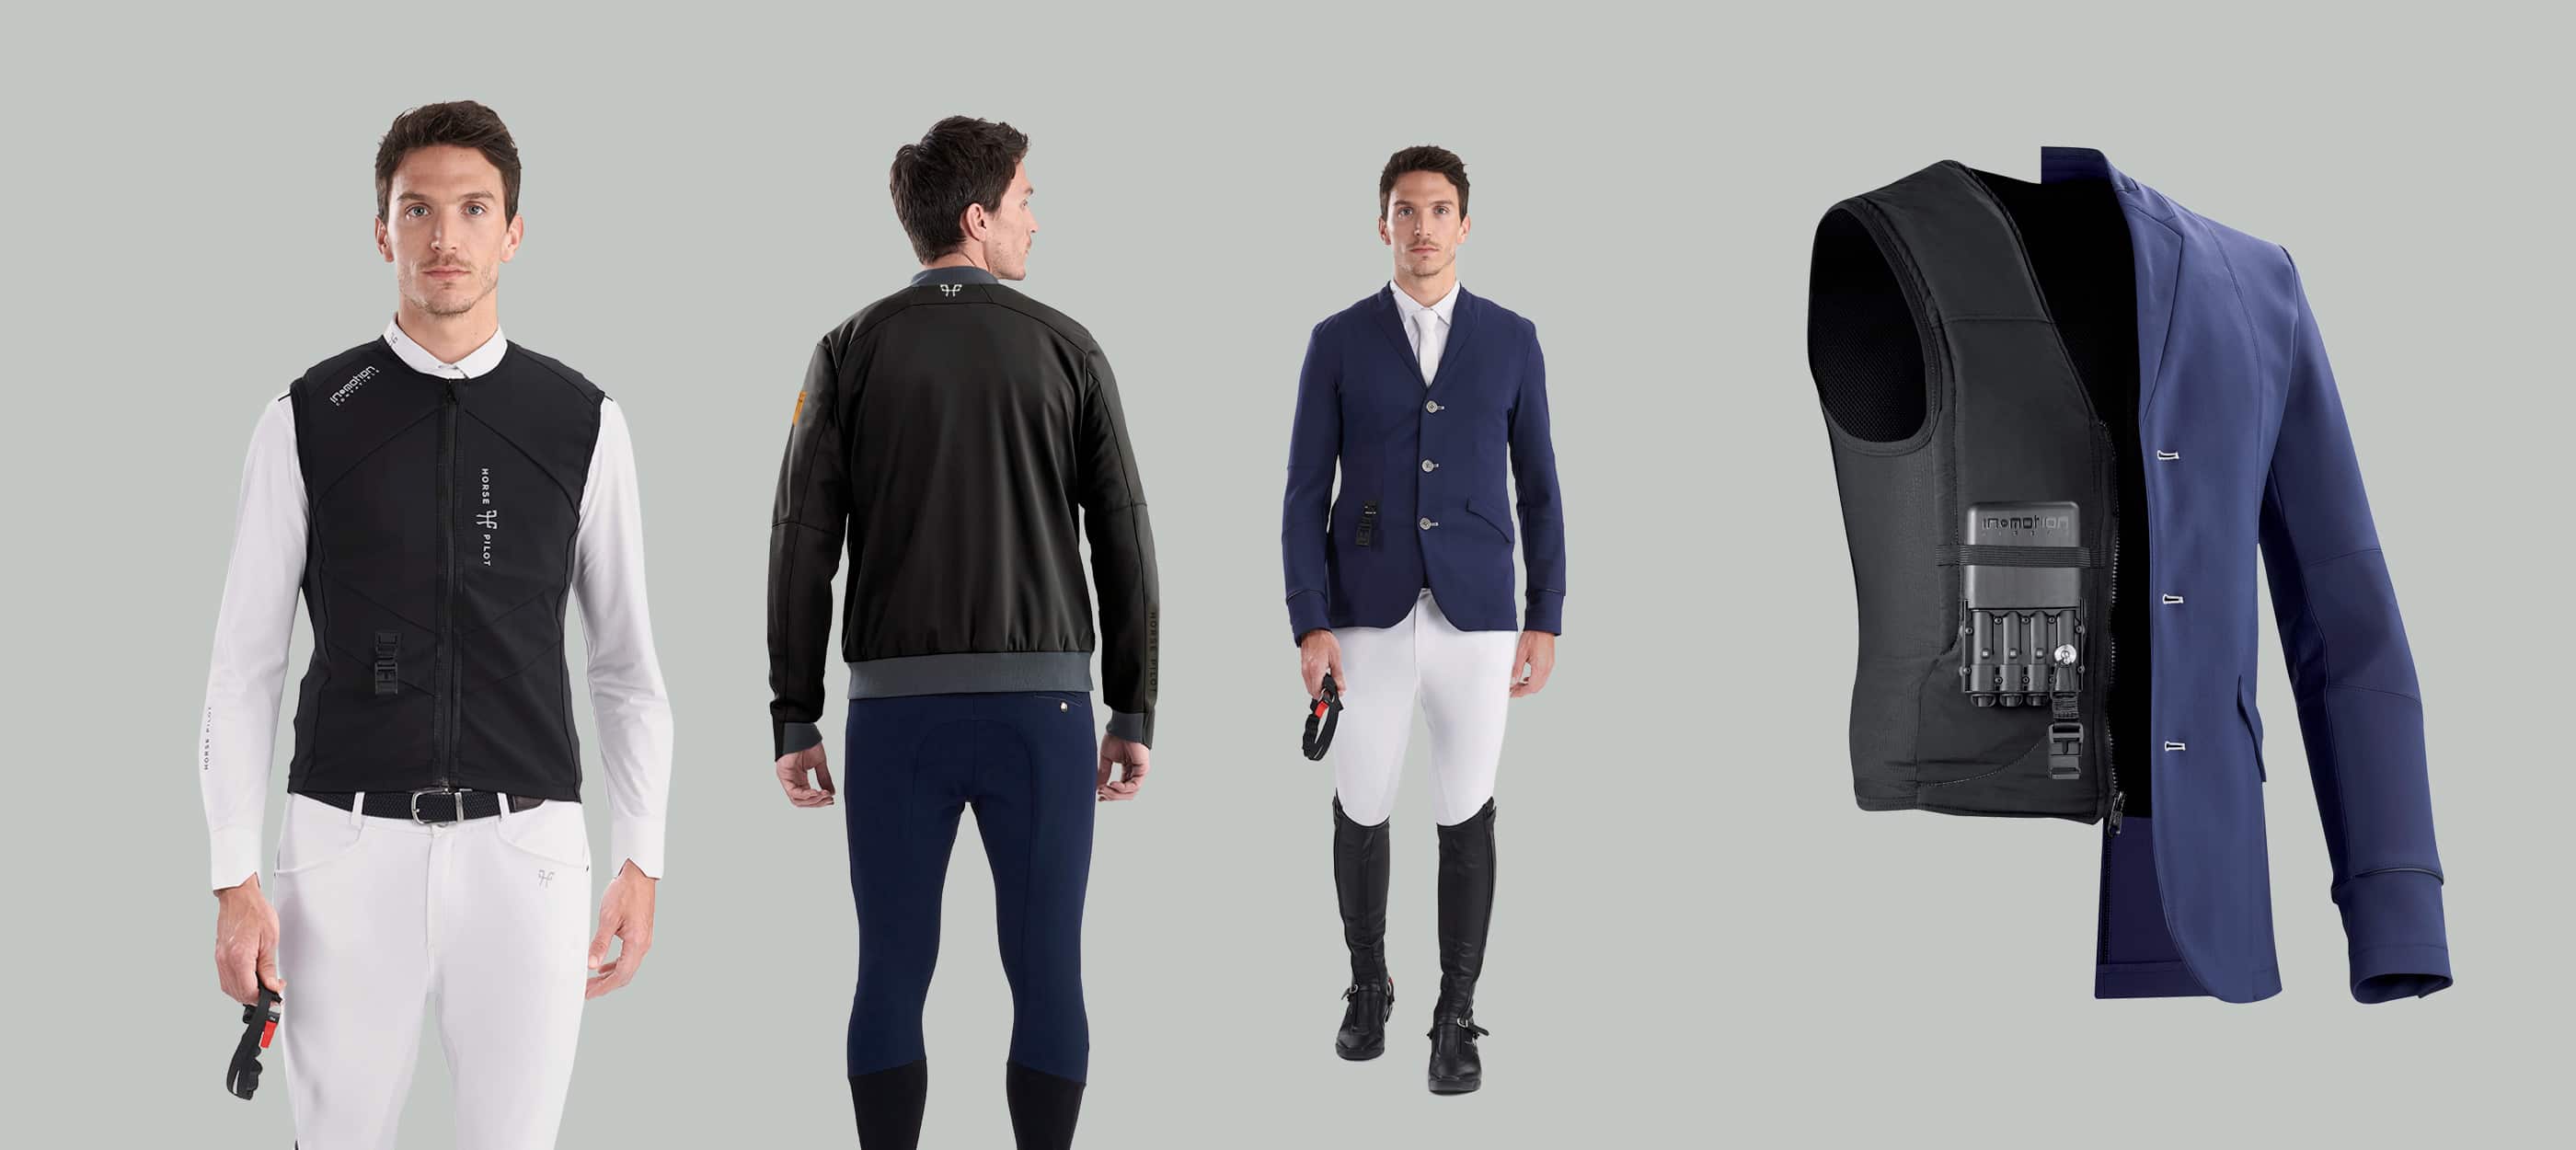 The Airbag compatible range including the AMP bomber and competition jacket for men